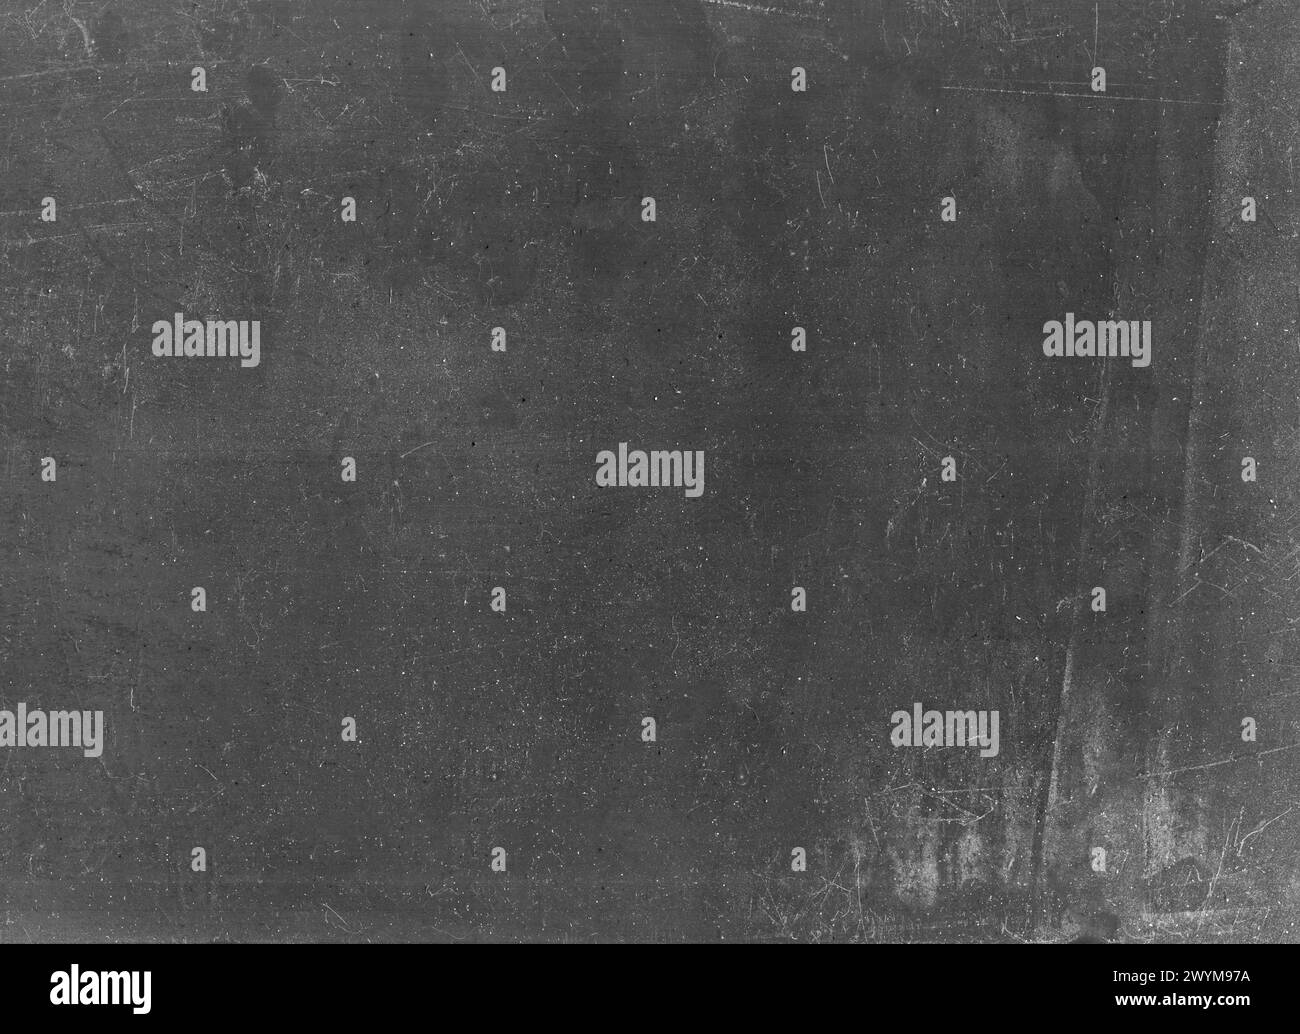 Noise scratch. Old film. Gray color vintage dust grain texture analog tv defect stained chalkboard worn tape retro grunge abstract background. Stock Photo